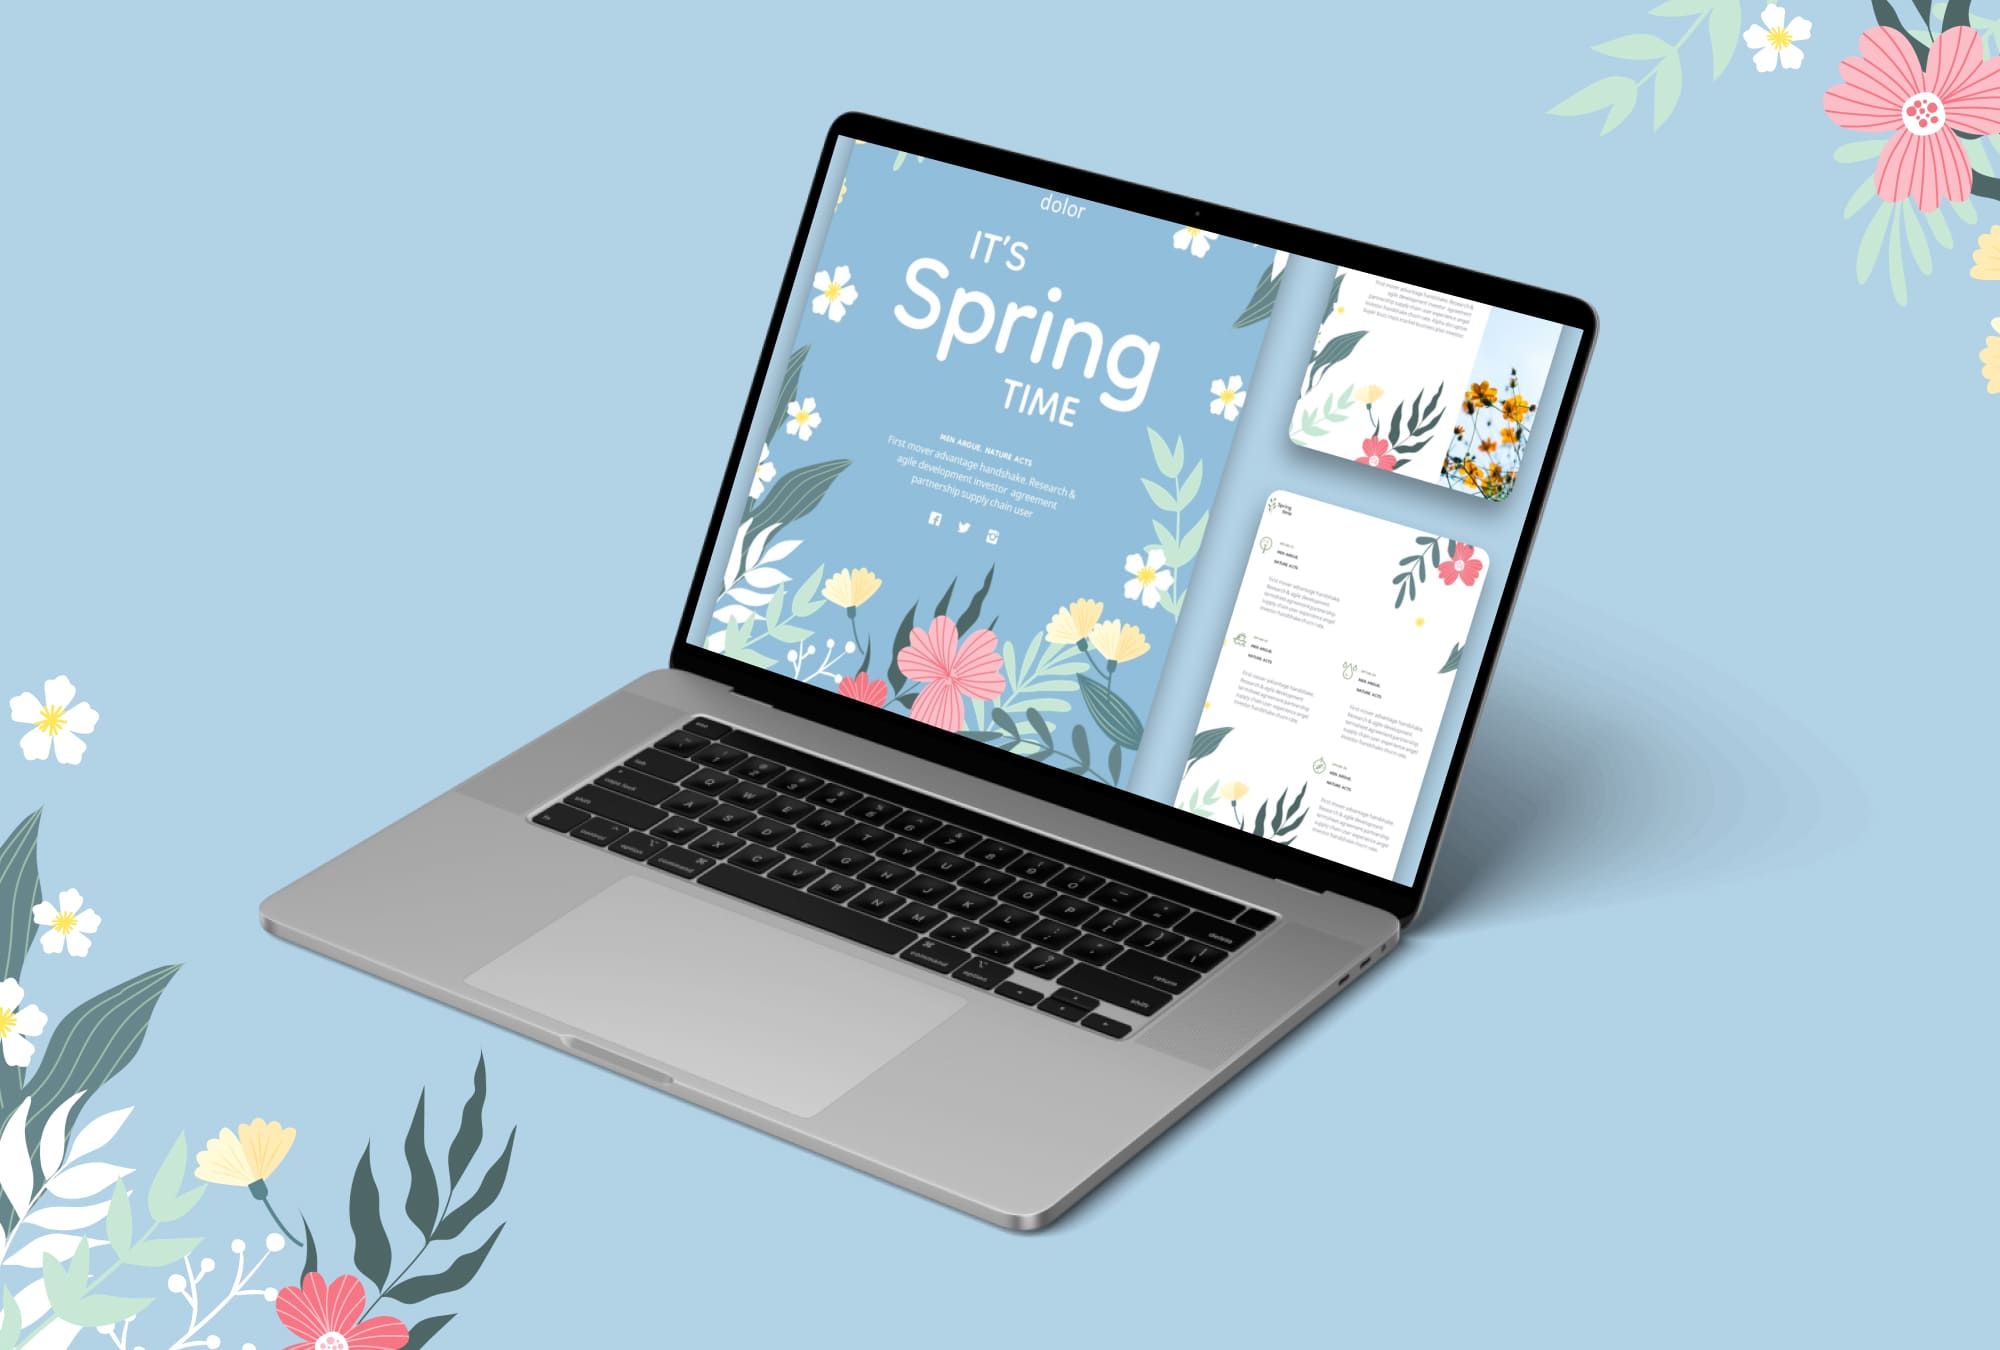 Collection of images of presentation slides on the theme of spring on a laptop screen.